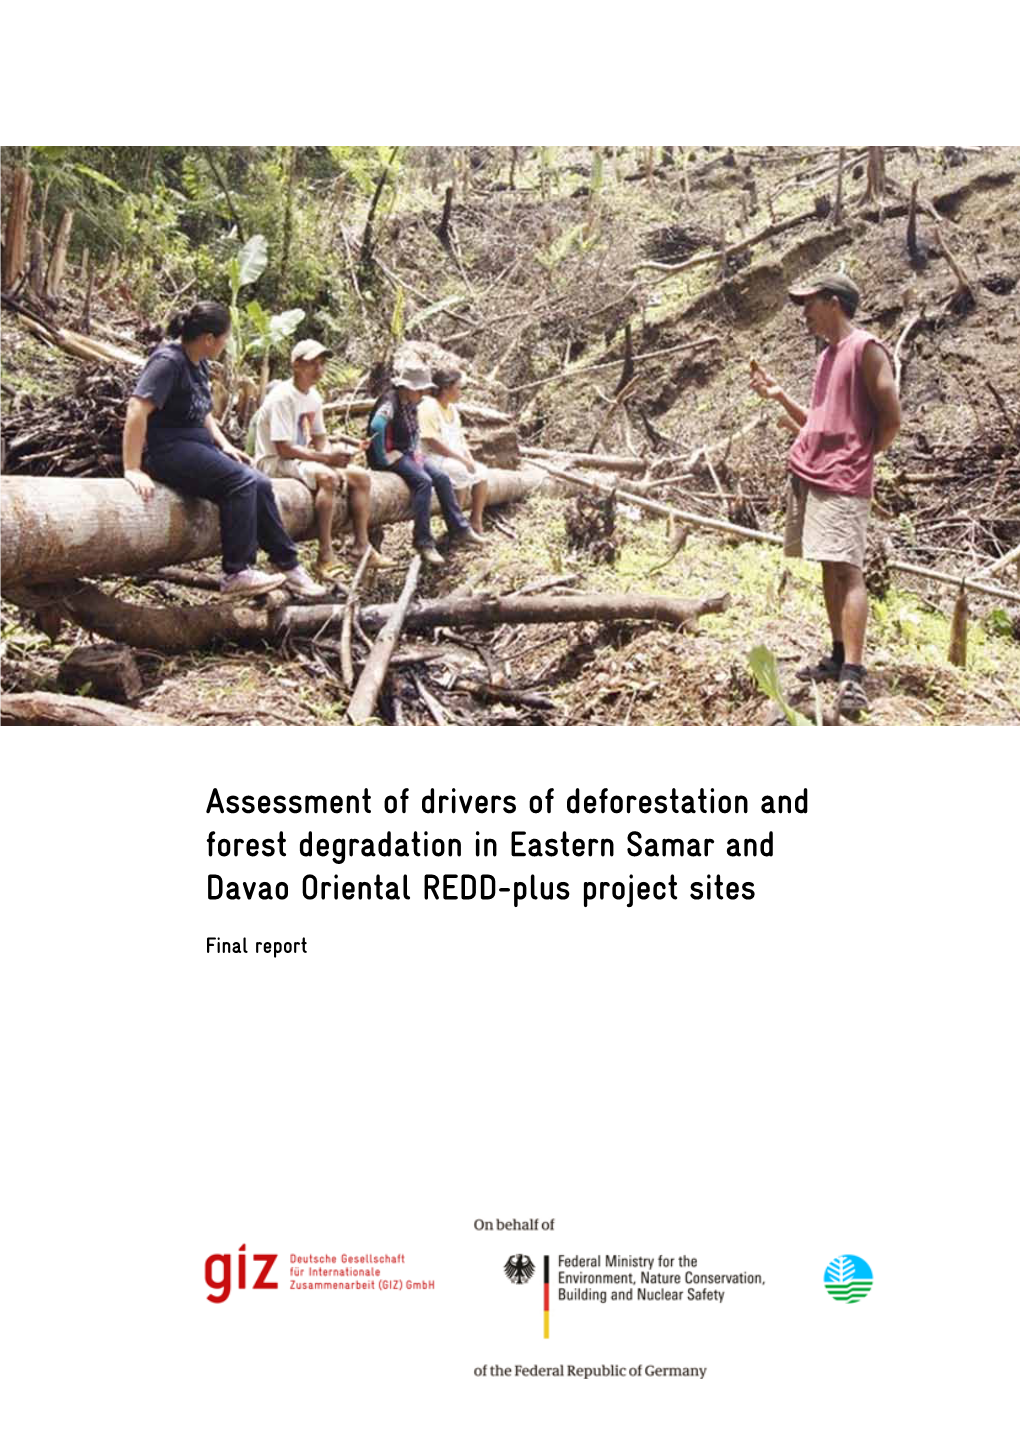 Assessment of Drivers of Deforestation and Forest Degradation in Eastern Samar and Davao Oriental REDD-Plus Project Sites